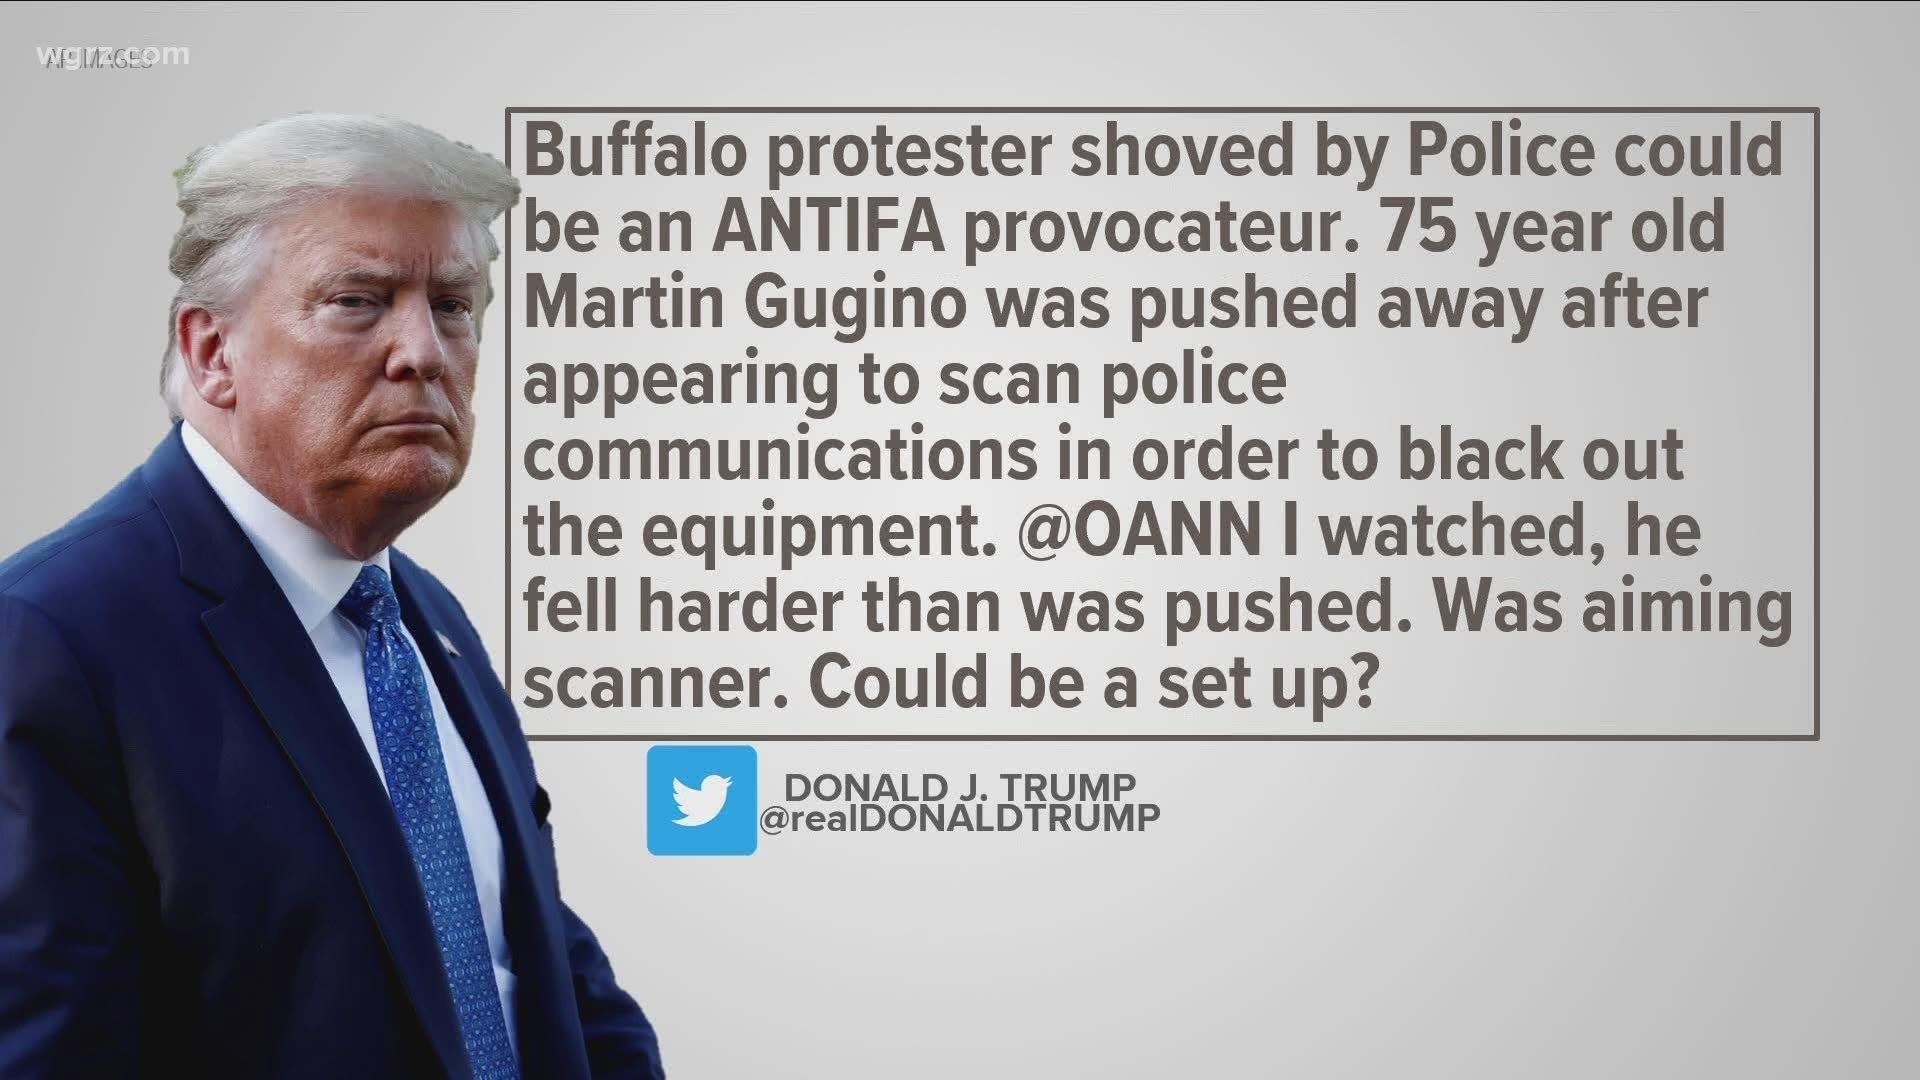 the president alleges gugino is a member of ANTIFA and that he was trying to scan the police communitcation equipment.